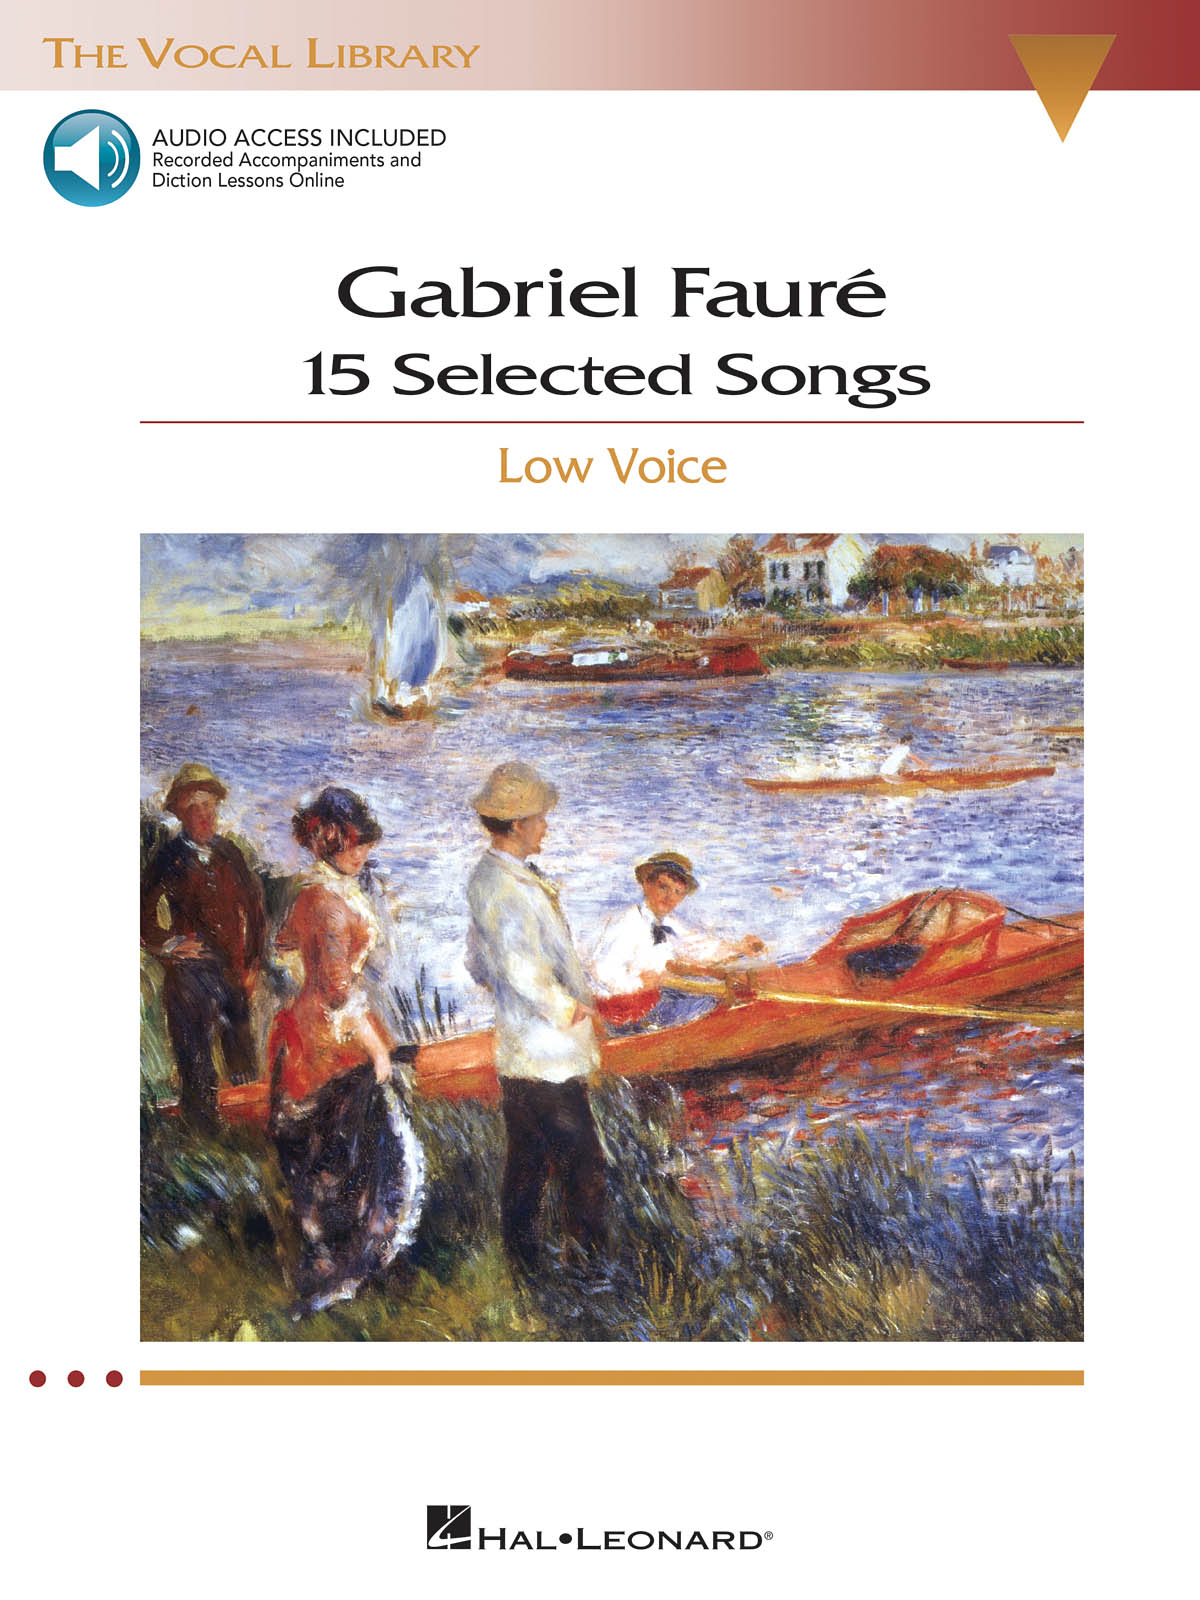 Gabriel Faur: 15 Selected Songs - Low Voice: Vocal and Piano: Vocal Album